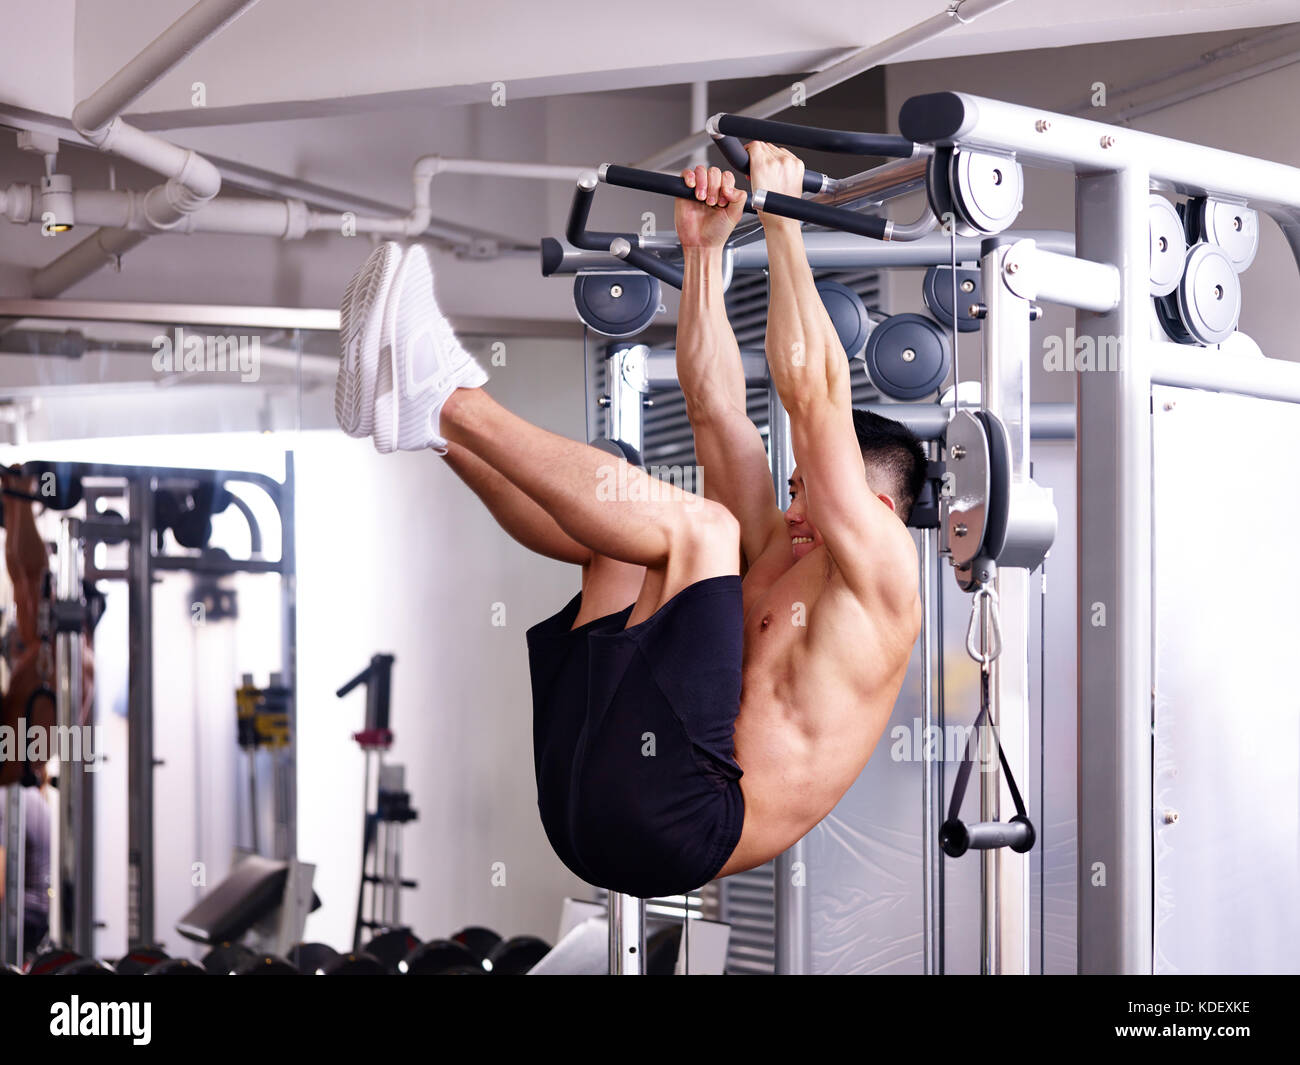 asian bodybuilder exercising abdominal muscle by hanging himself on equipment. Stock Photo